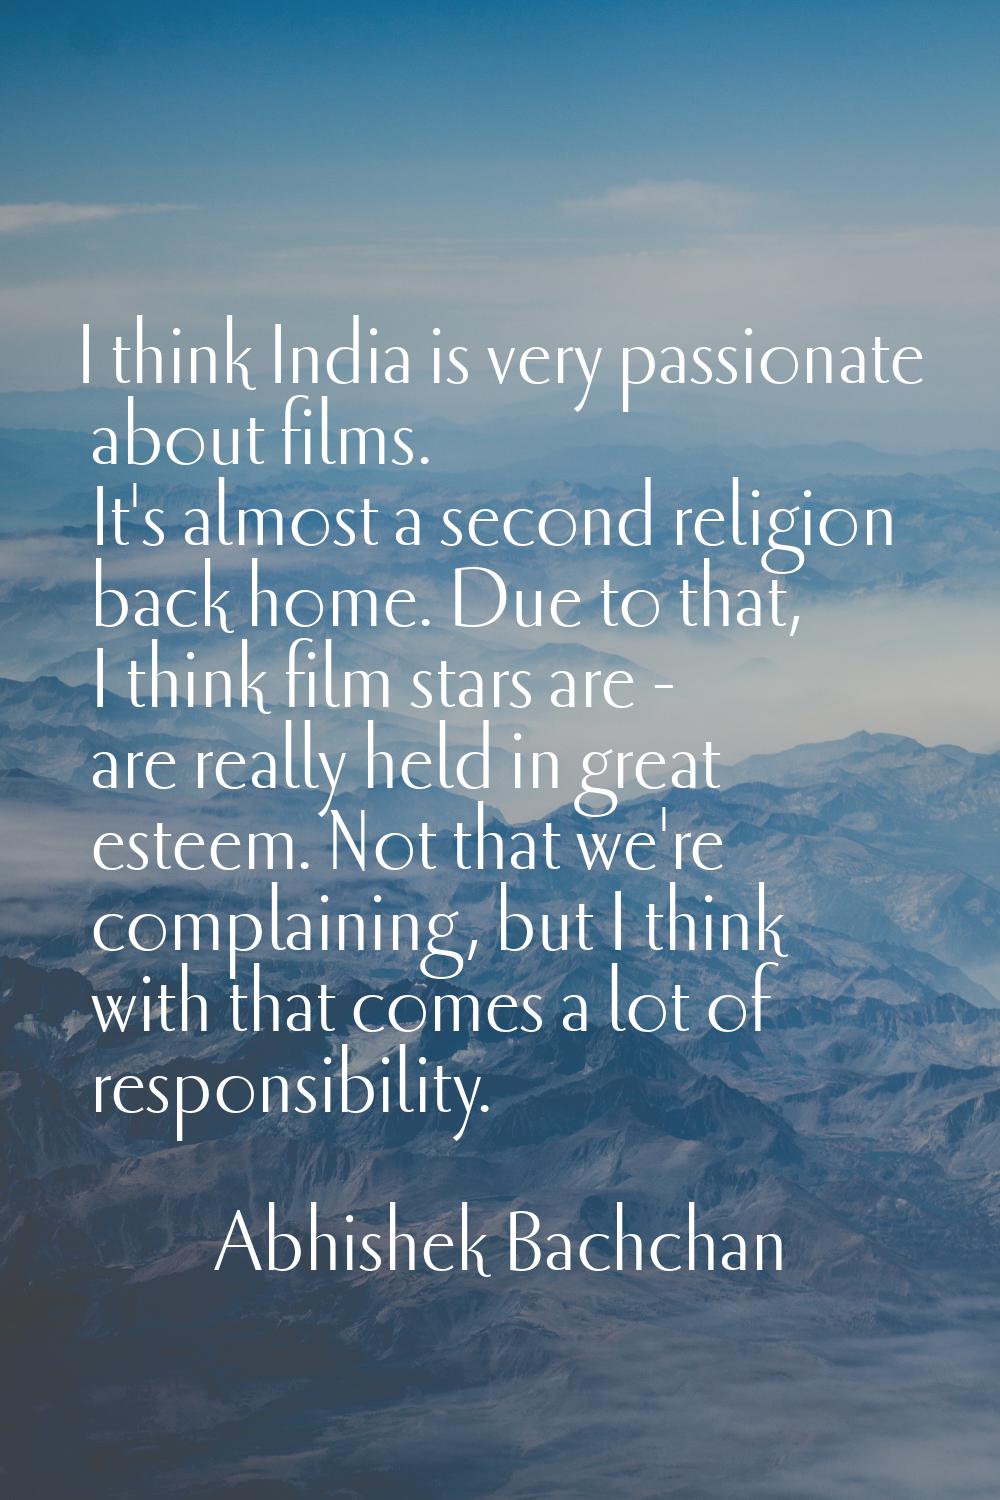 I think India is very passionate about films. It's almost a second religion back home. Due to that,